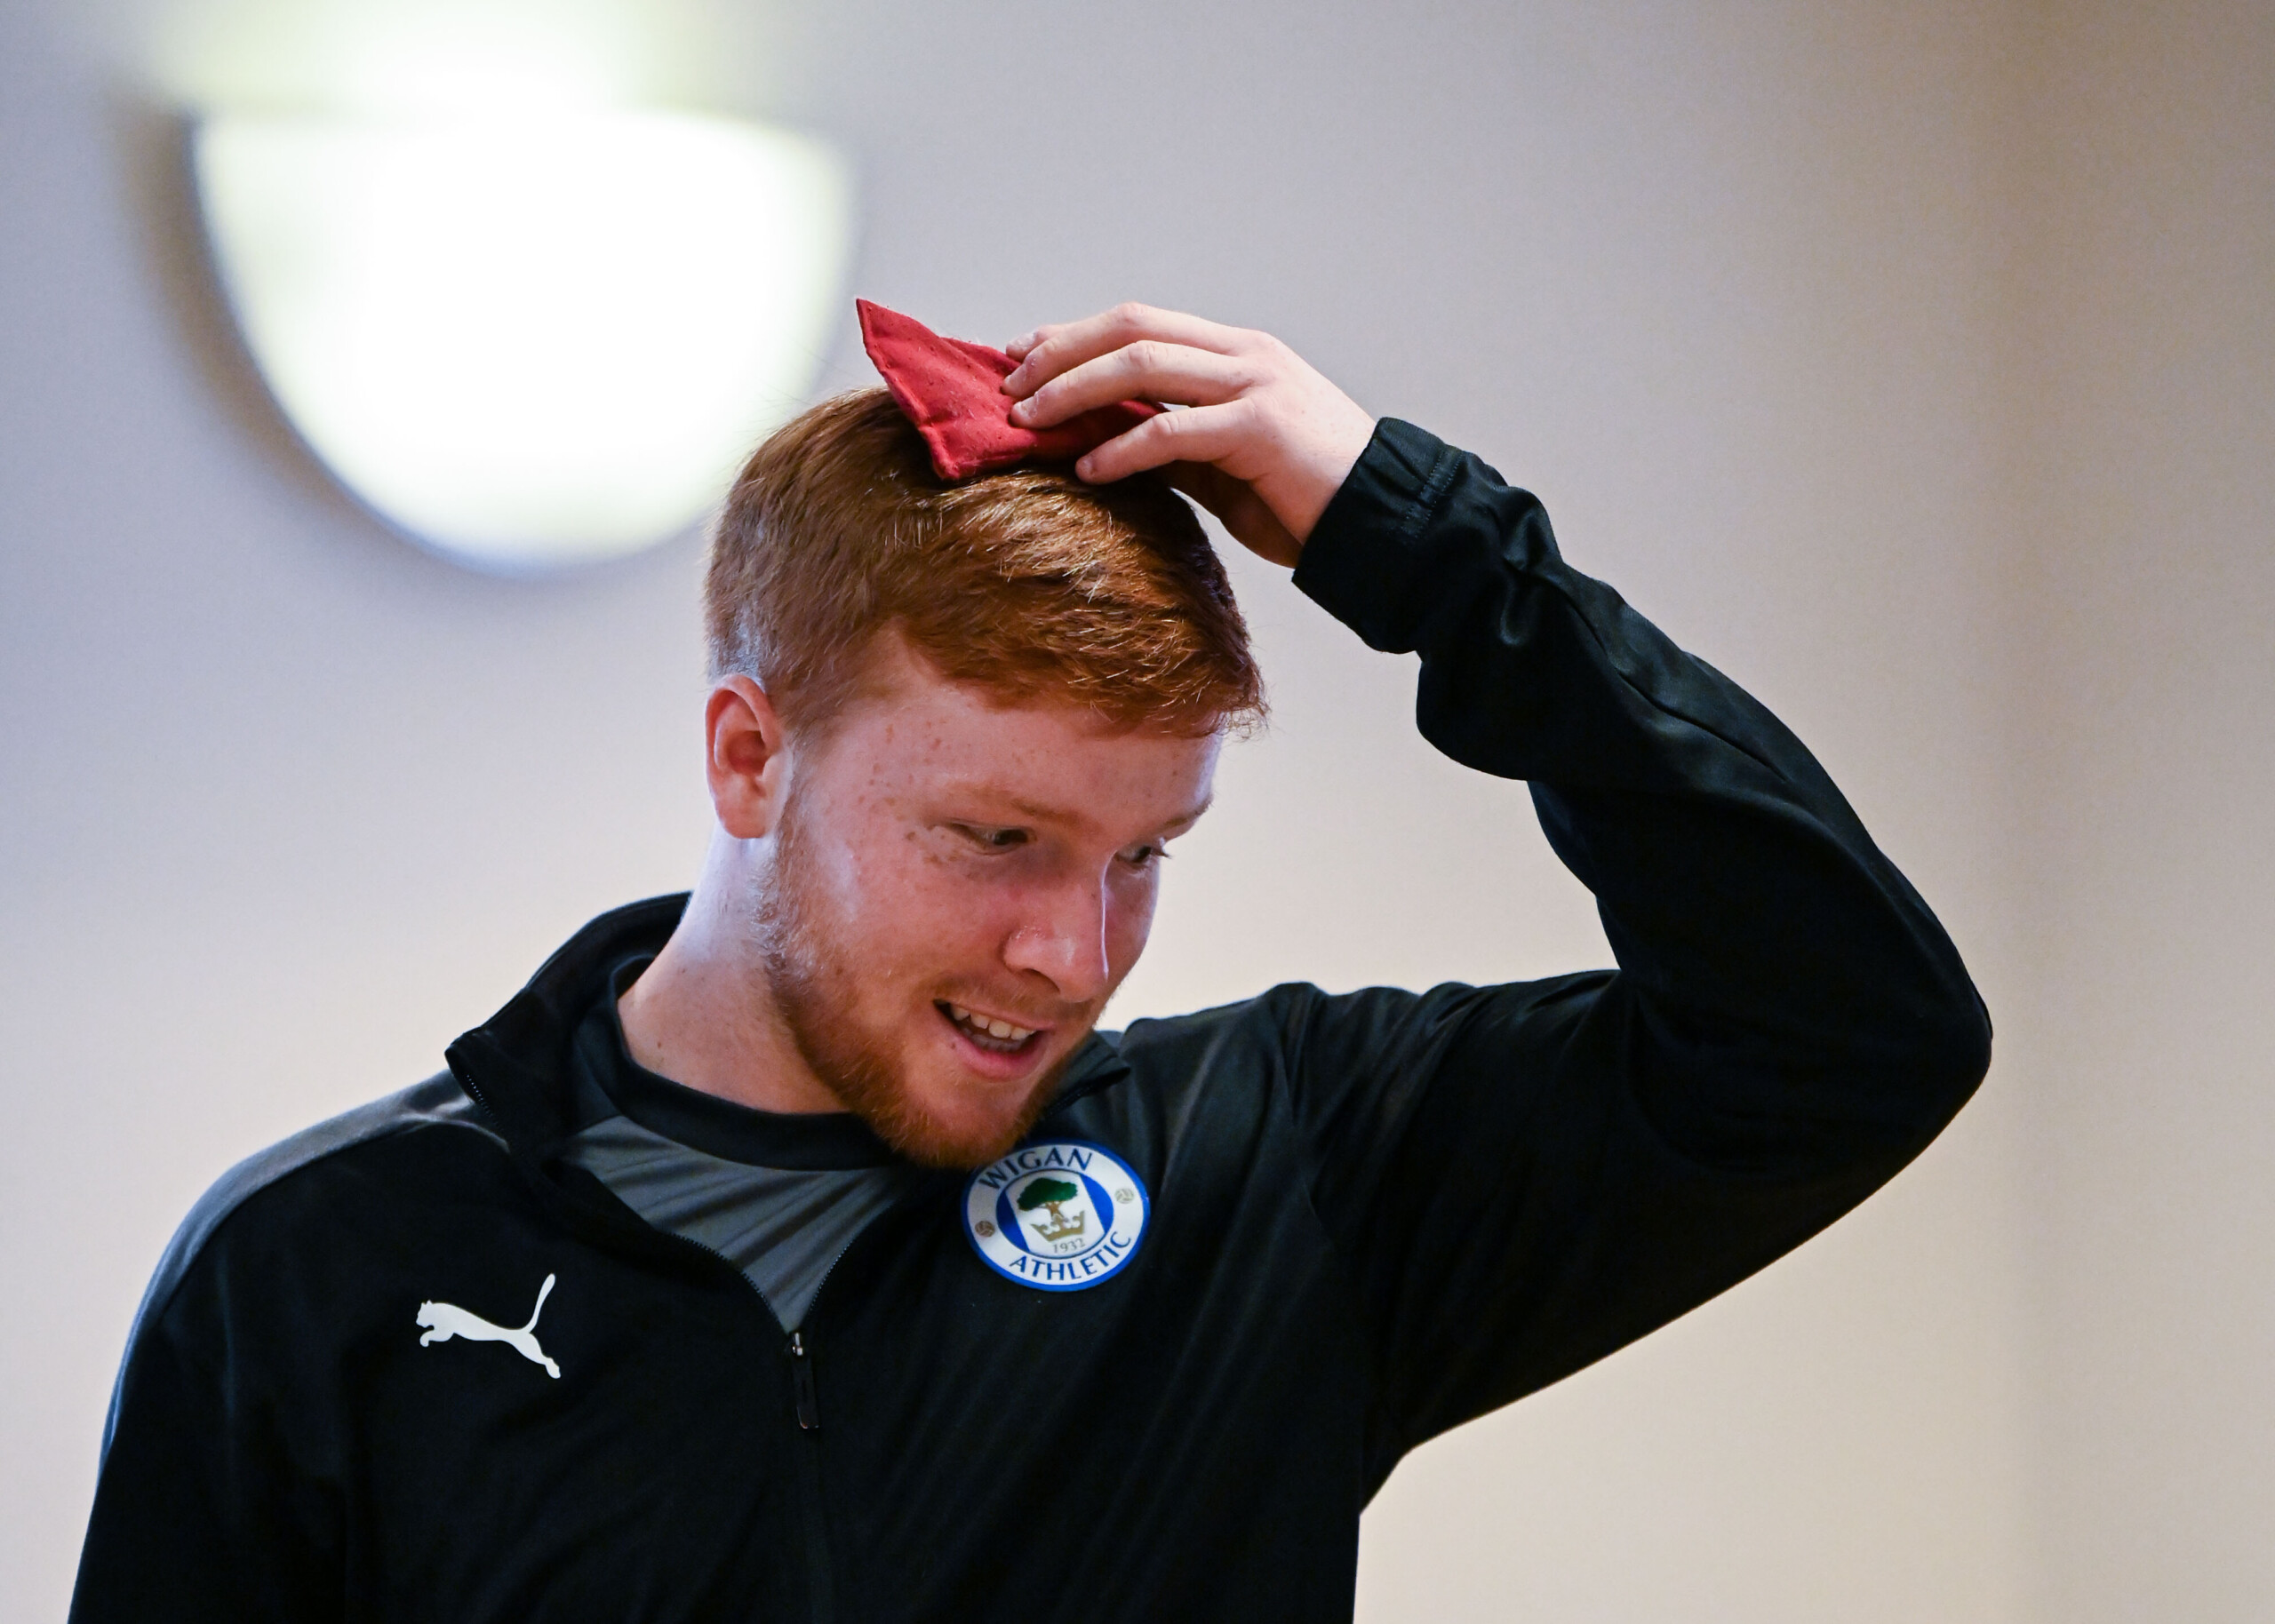 Latics Apprentices Relaunch 'Kids on the Move' Community Project